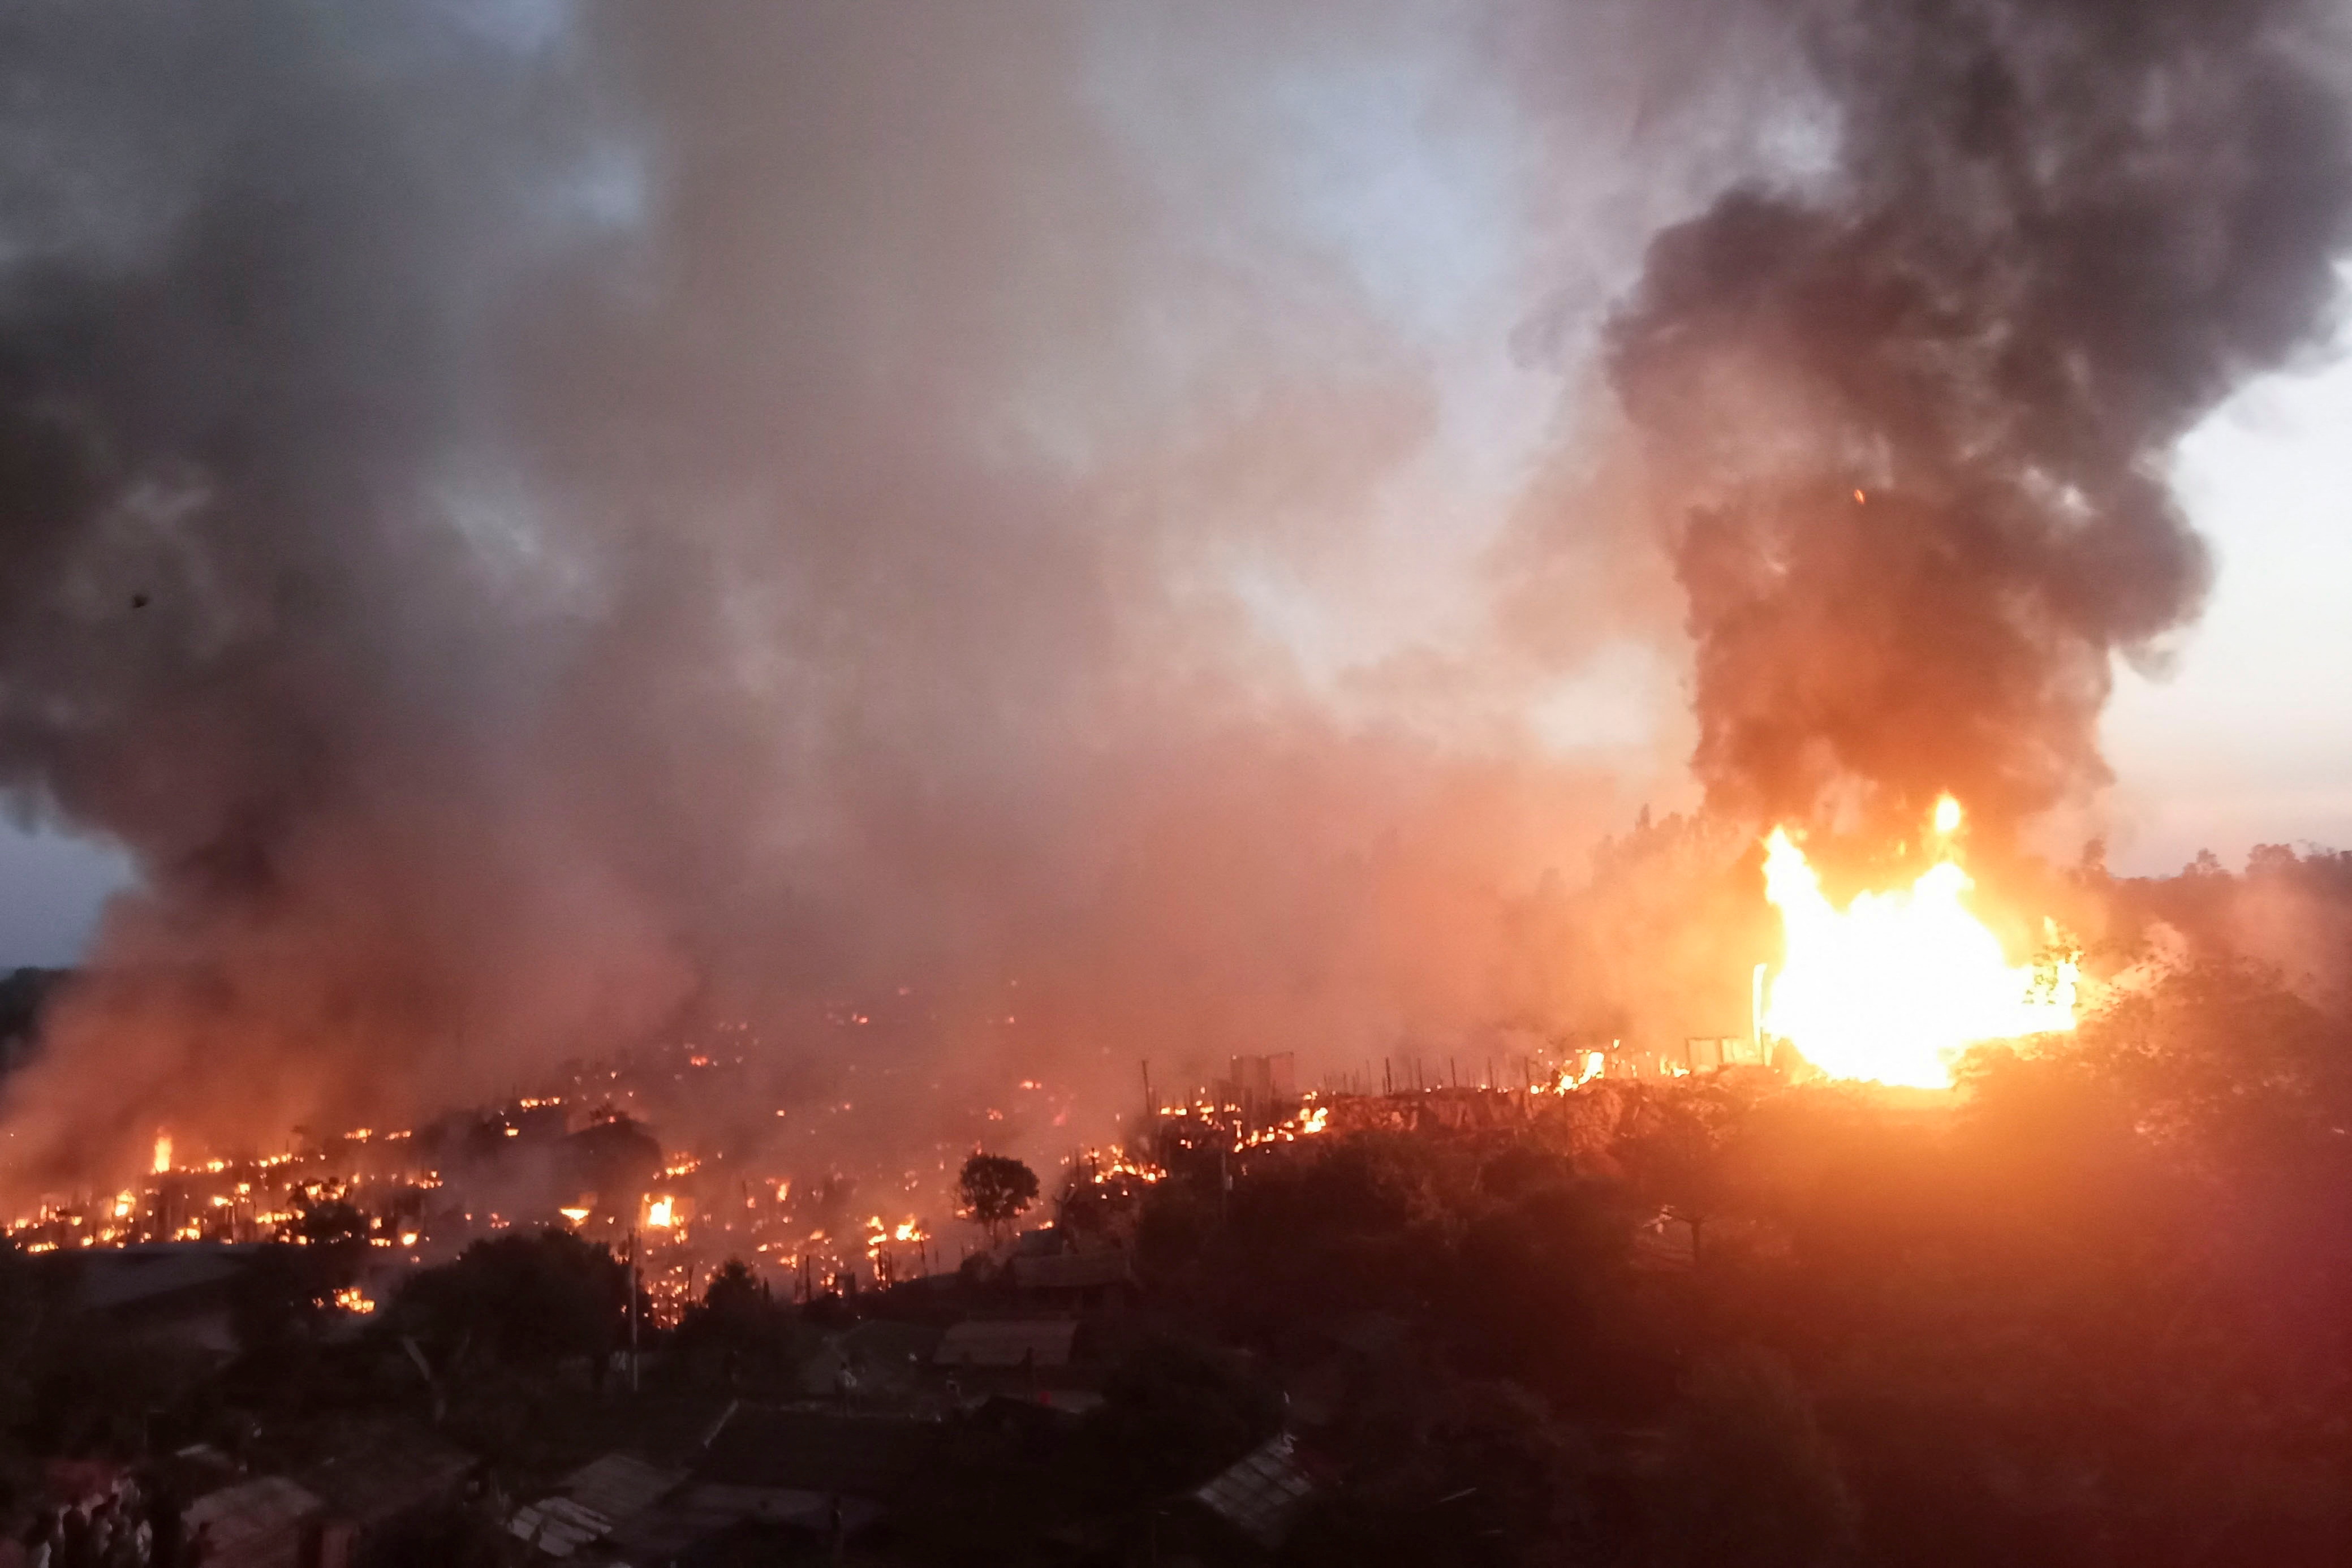 A general view of the fire that broke out at the Balukhali rohingya refugee camp in Cox's Bazar, Bangladesh, January 9, 2022. REUTERS/Stringer NO RESALES. NO ARCHIVES